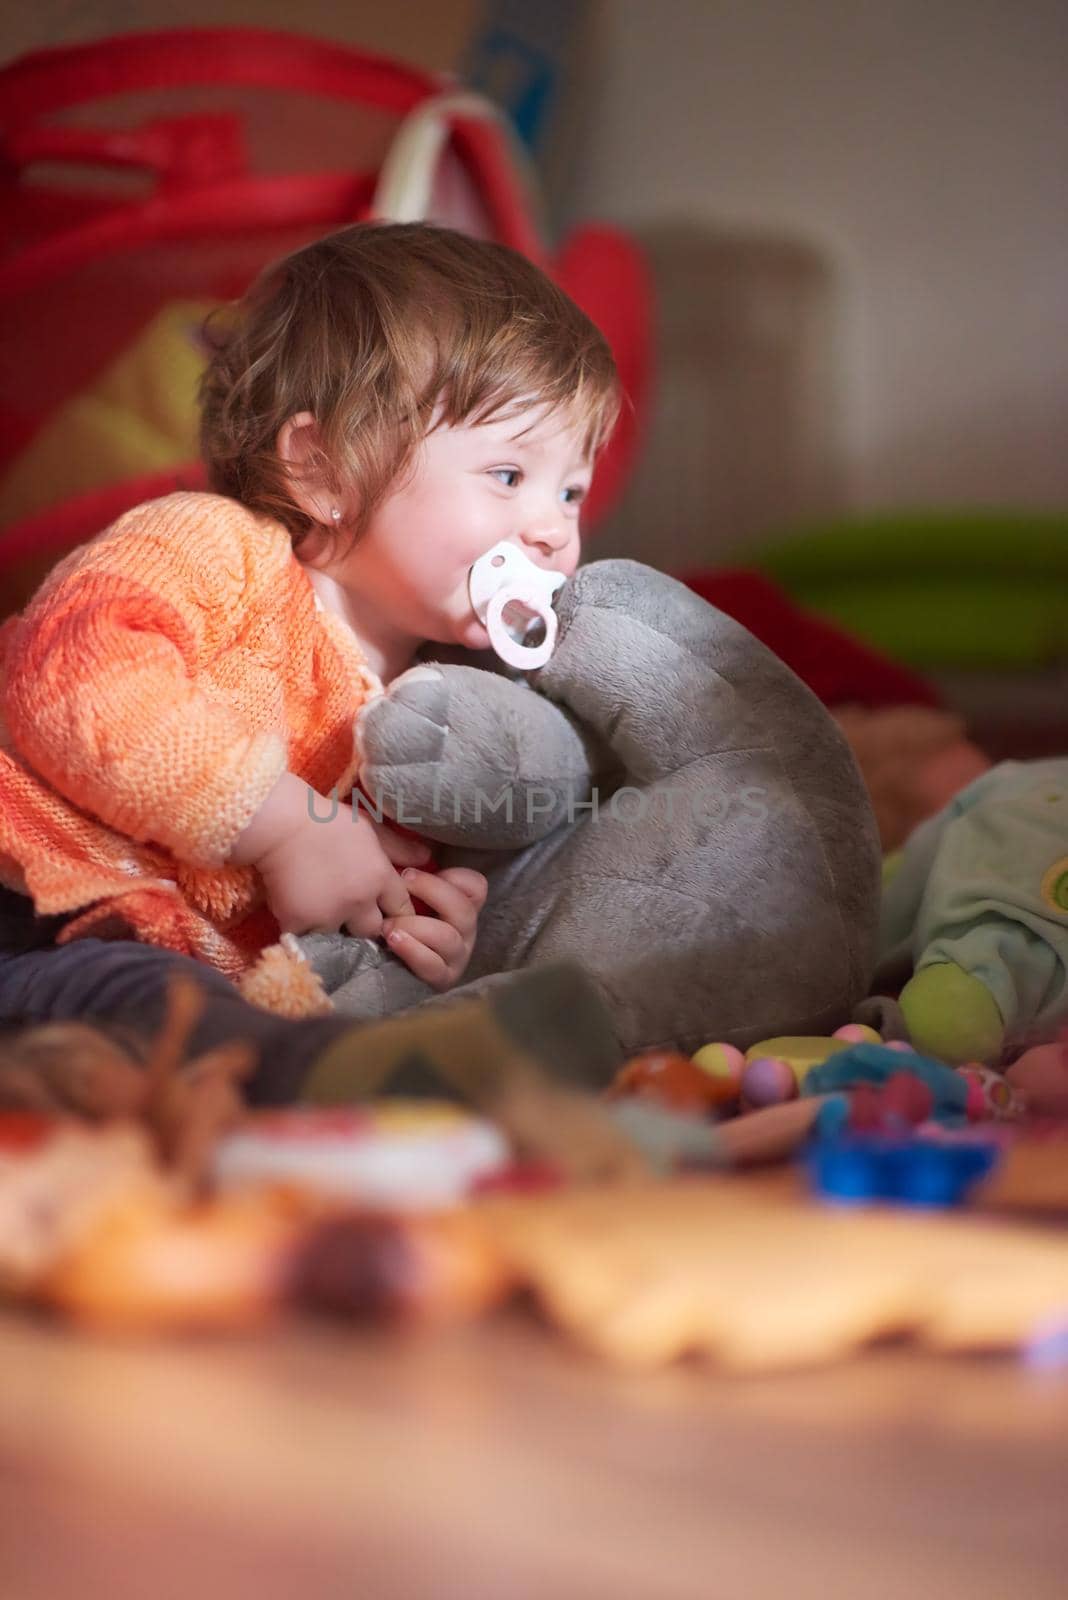 child playing with toys  at home by dotshock